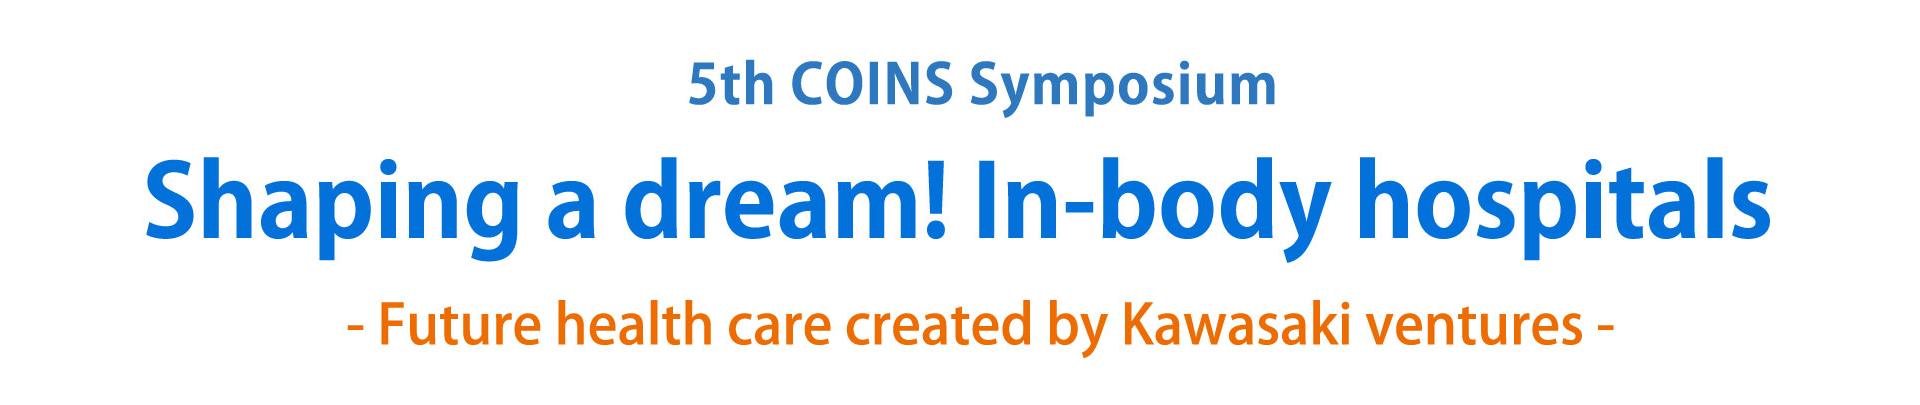 5th COINS Symposium Shaping a dream! In-body hospitals? -Future health care created by Kawasaki ventures-